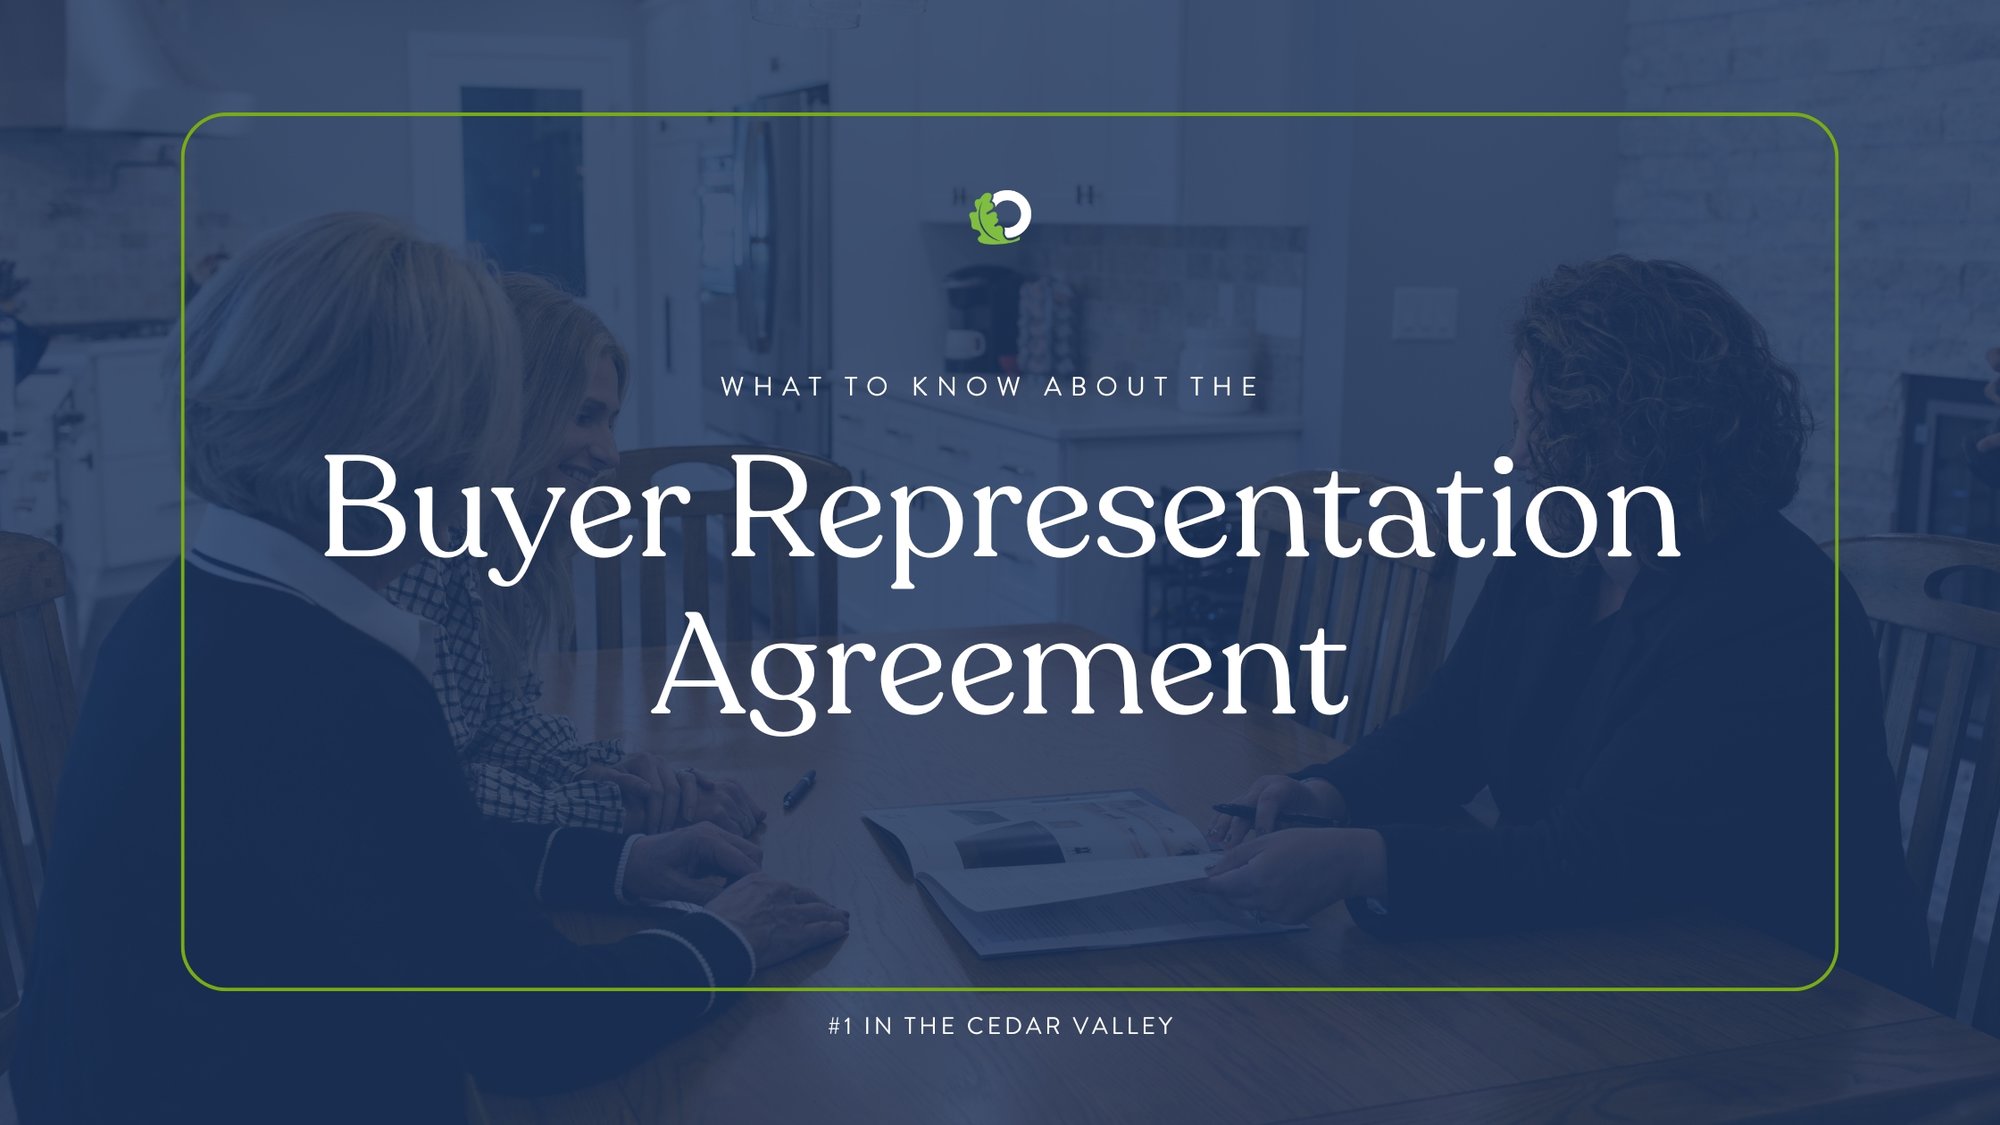 What to know about the Buyer Representation Agreement